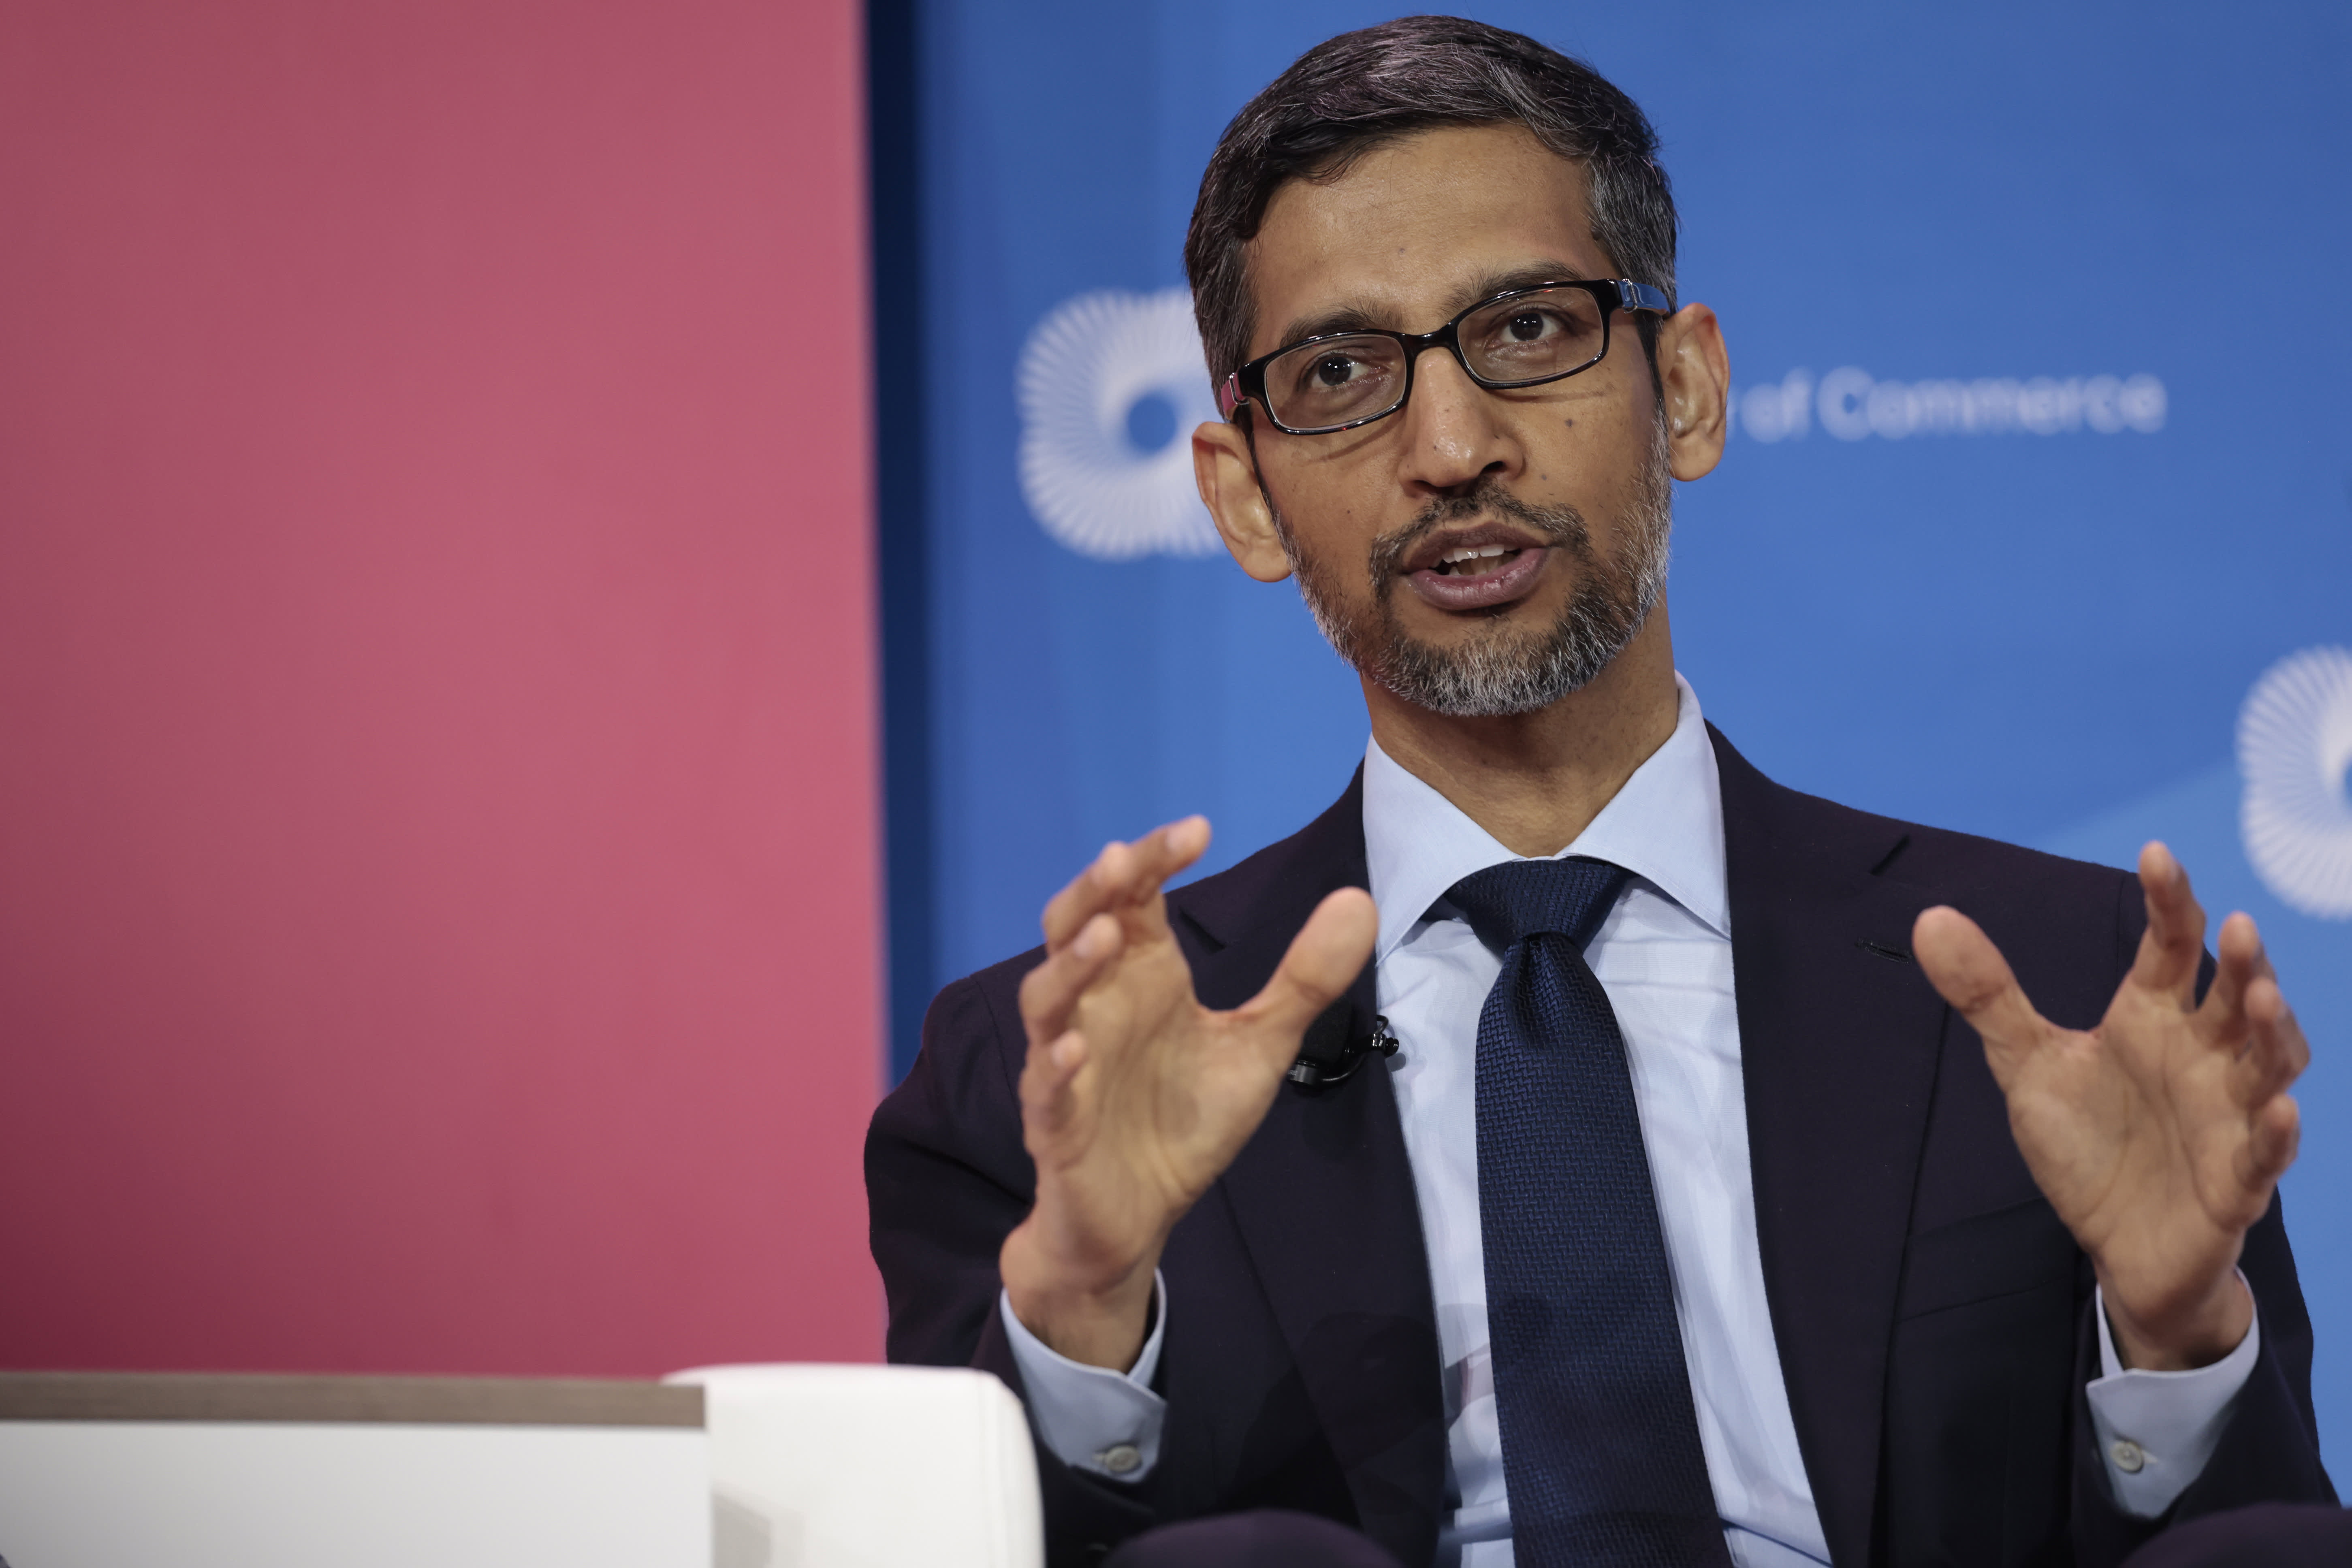 Google employees are complaining about CEO Sundar Pichai’s salary increase